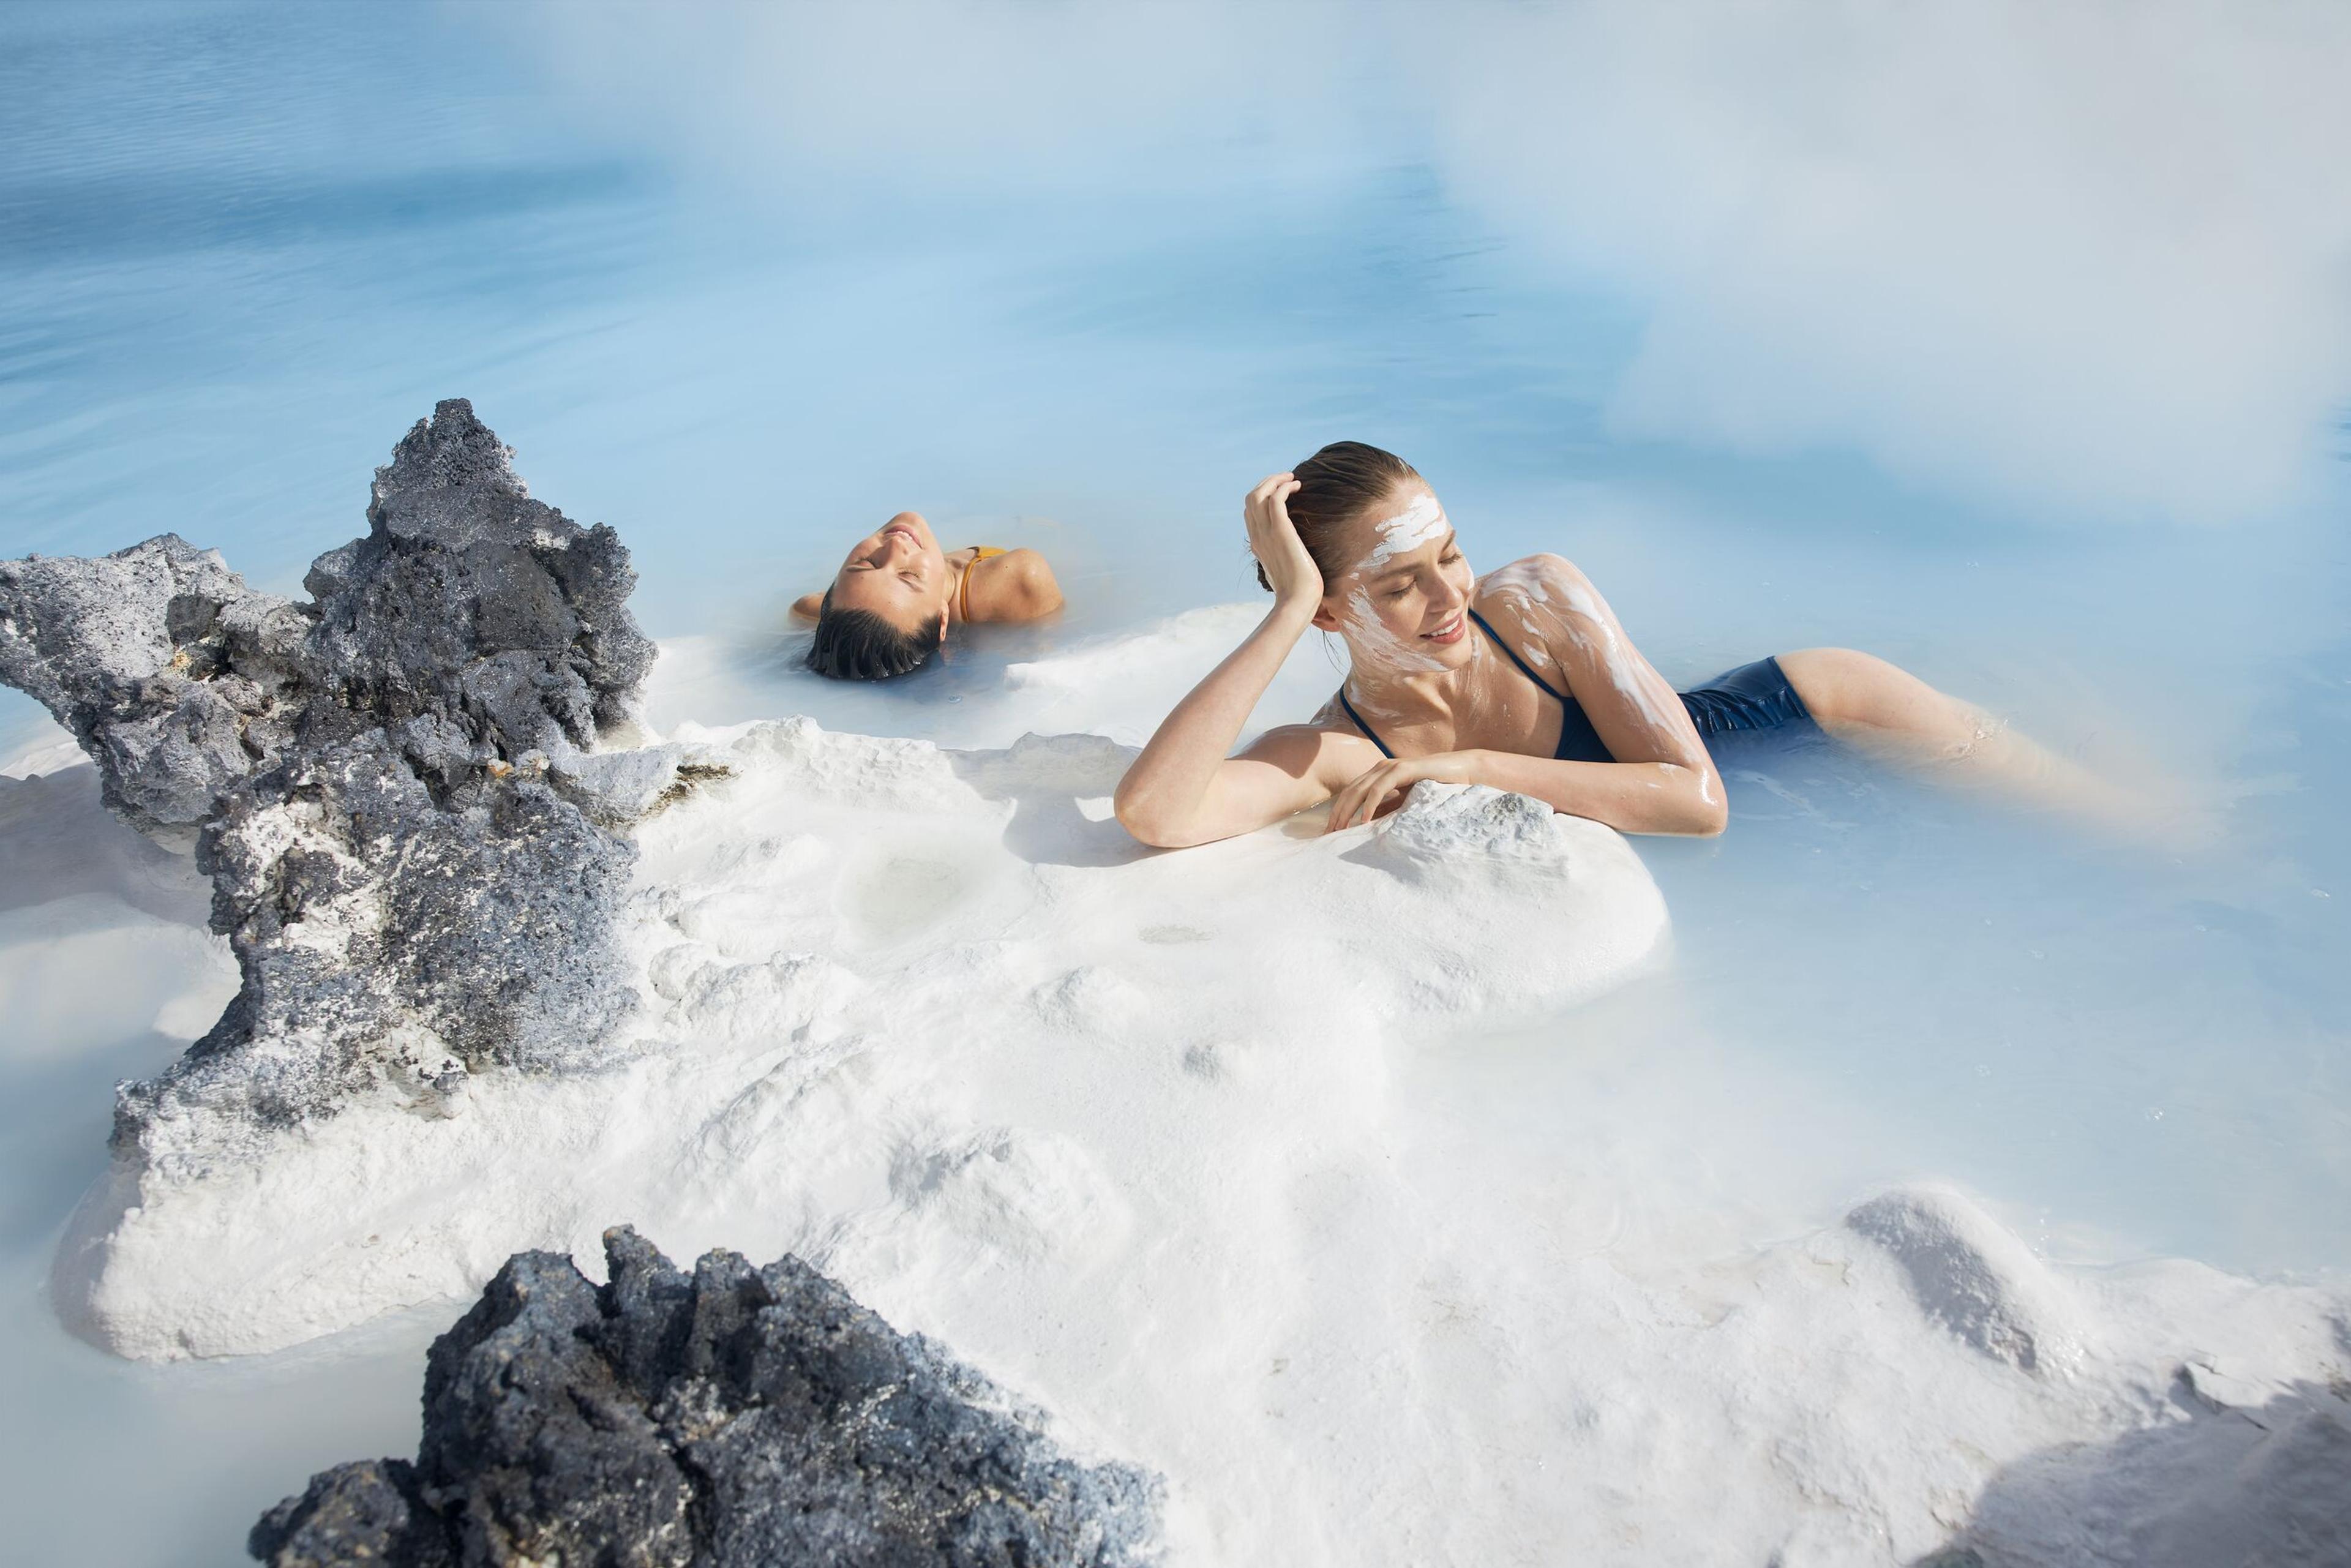 Two women leisurely resting in the milky blue-white waters of the lagoon, propping themselves up on the smooth white silica rocks.